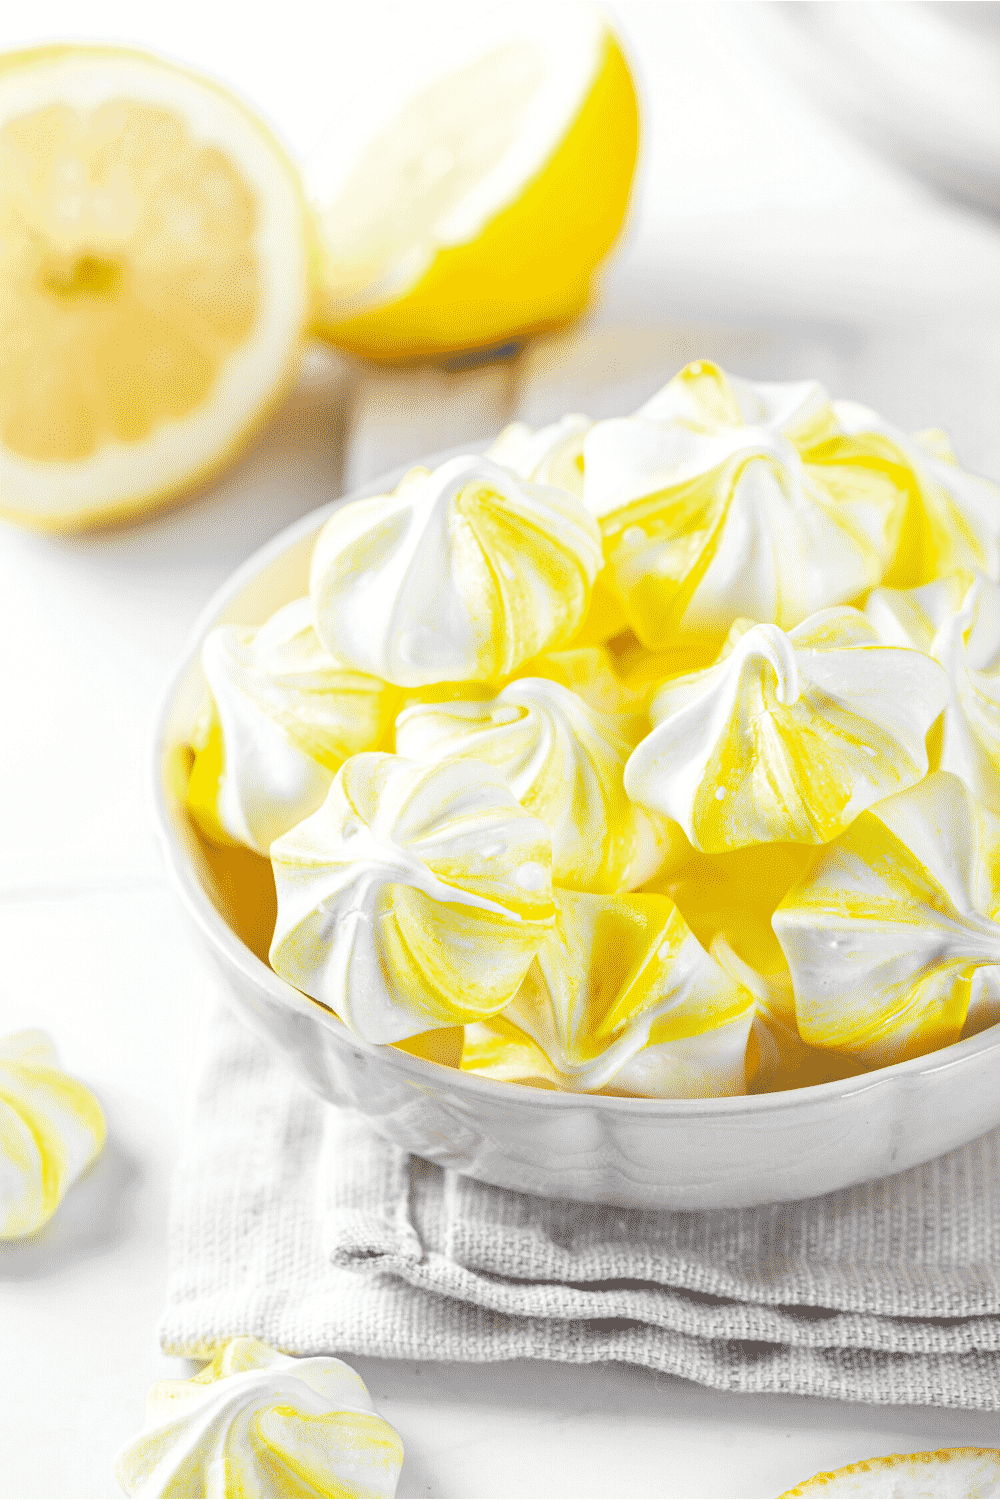 A white bowl filled with lemon meringue cookies. The ball is on the table cloth and a white counter with some lemons behind it.